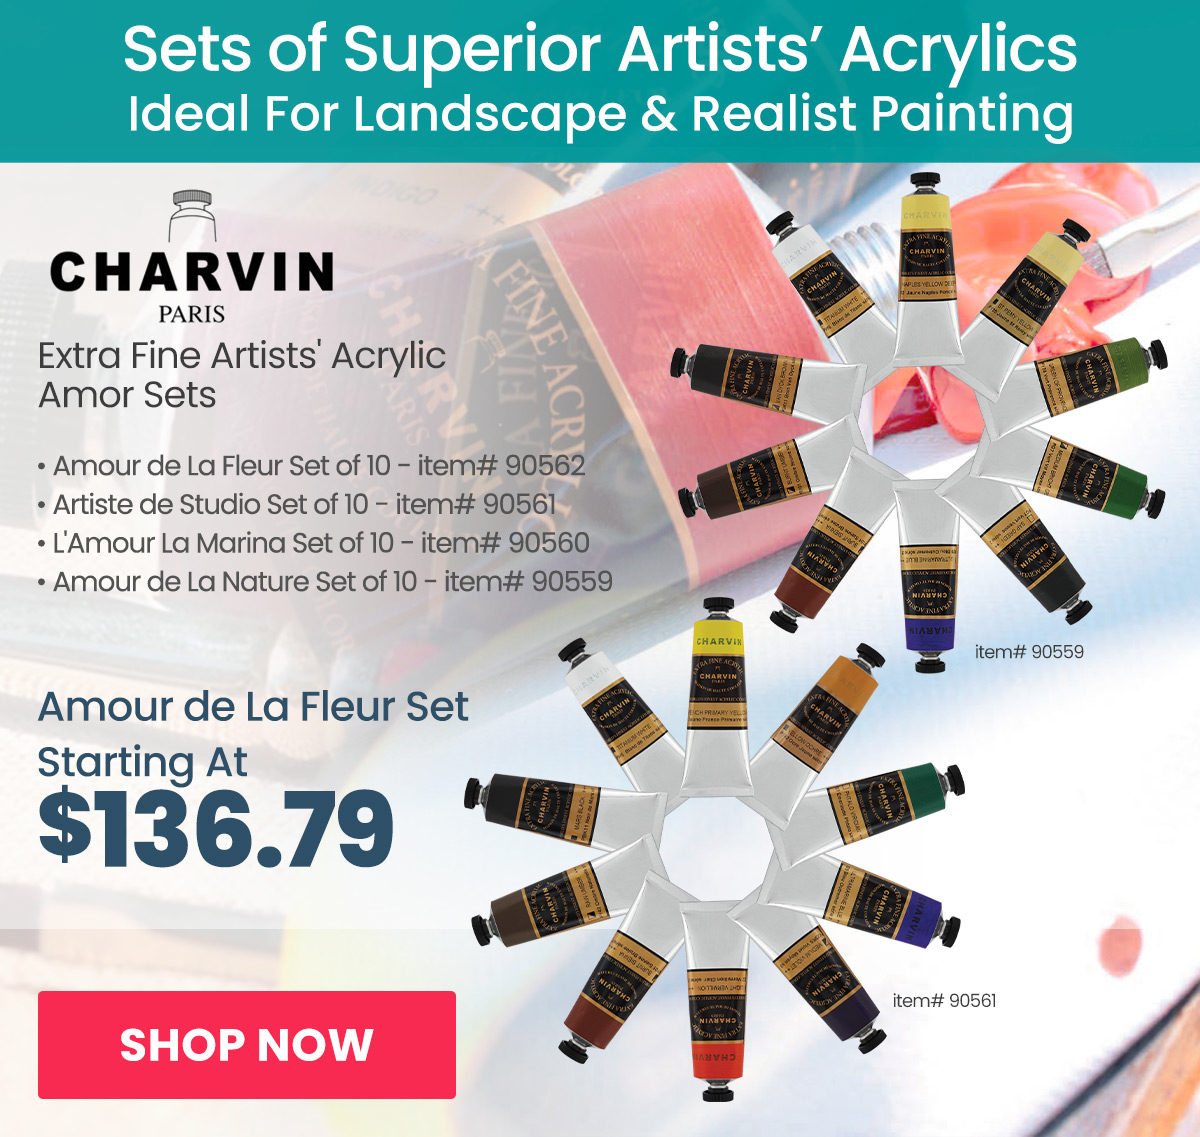 Charvin Extra Fine Artists' Acrylic Amore Paint Sets